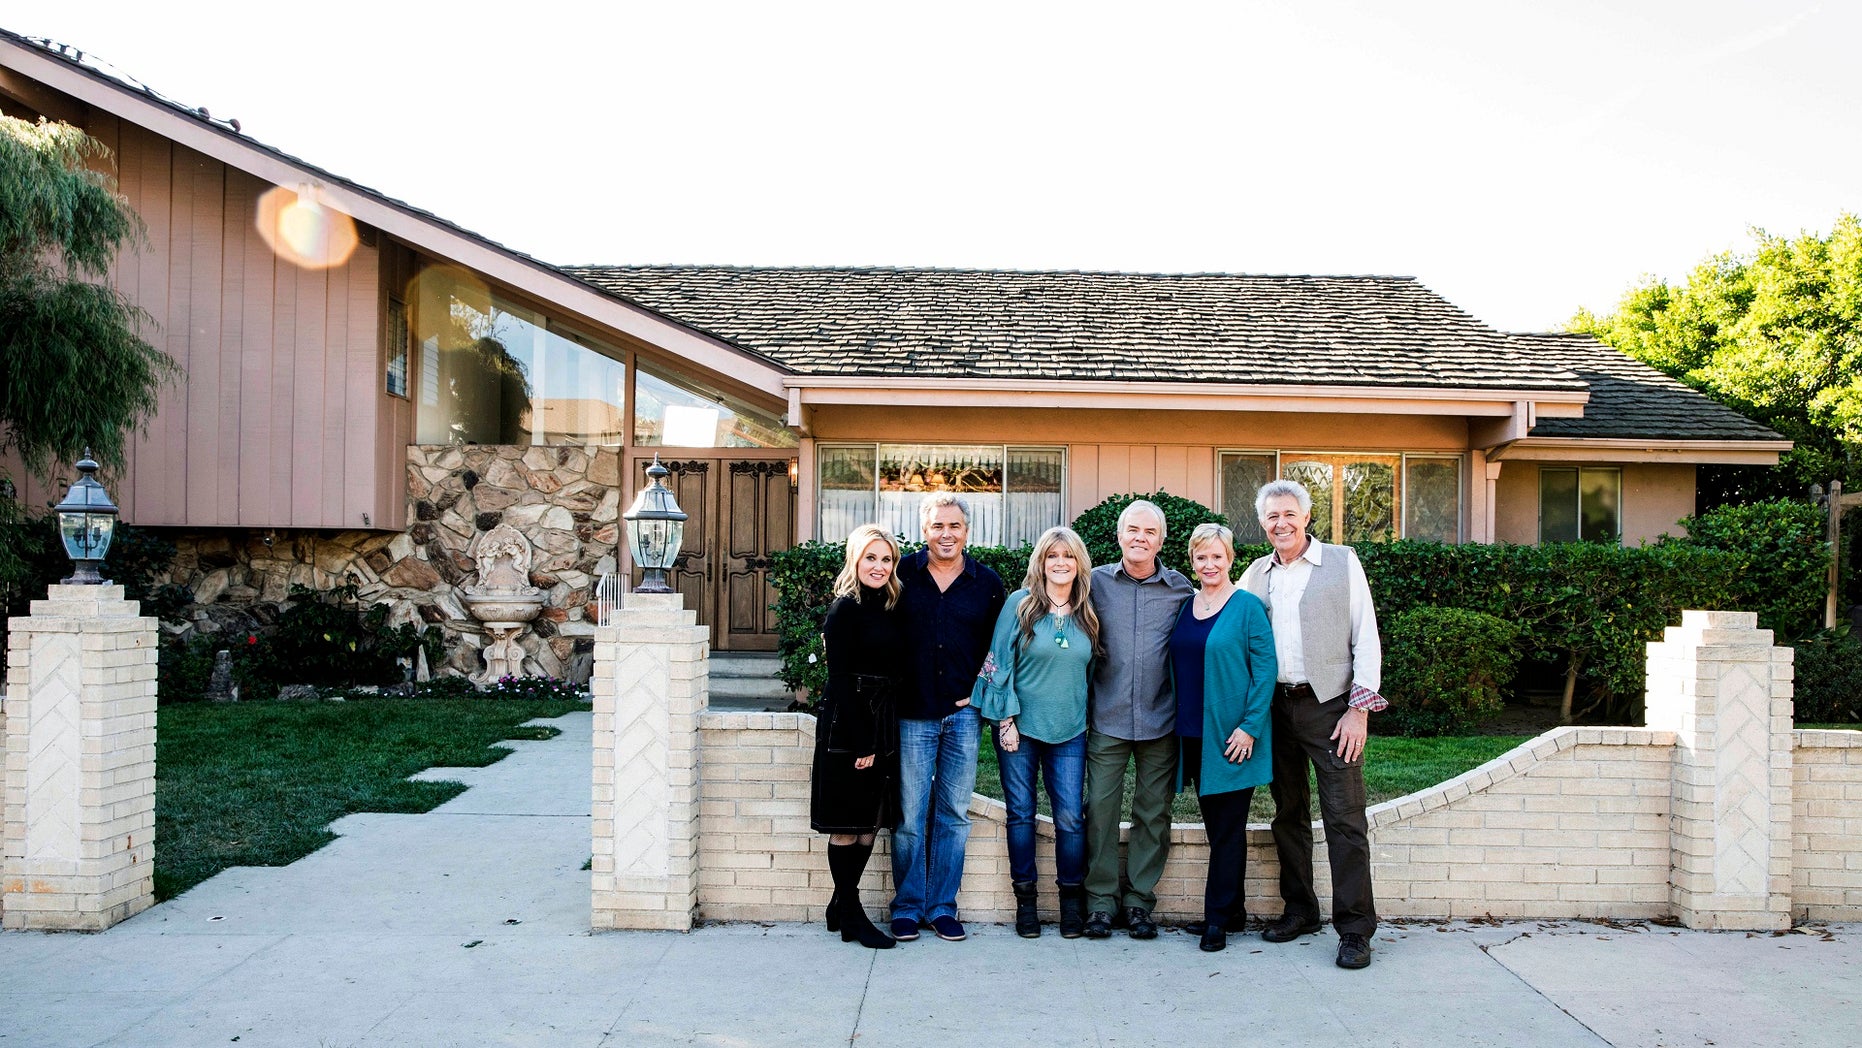 Brady Bunch cast: (left to right) Maureen McCormack (Marsha), Christopher Knight (Peter), Susan Olsen (Cindy), Mike Lookinland (Bobby), Eve Plumb (Jan) and Barry Williams (Greg) in front of the original Brady home in Studio City, CA, as seen on A Very Brady Renovation.